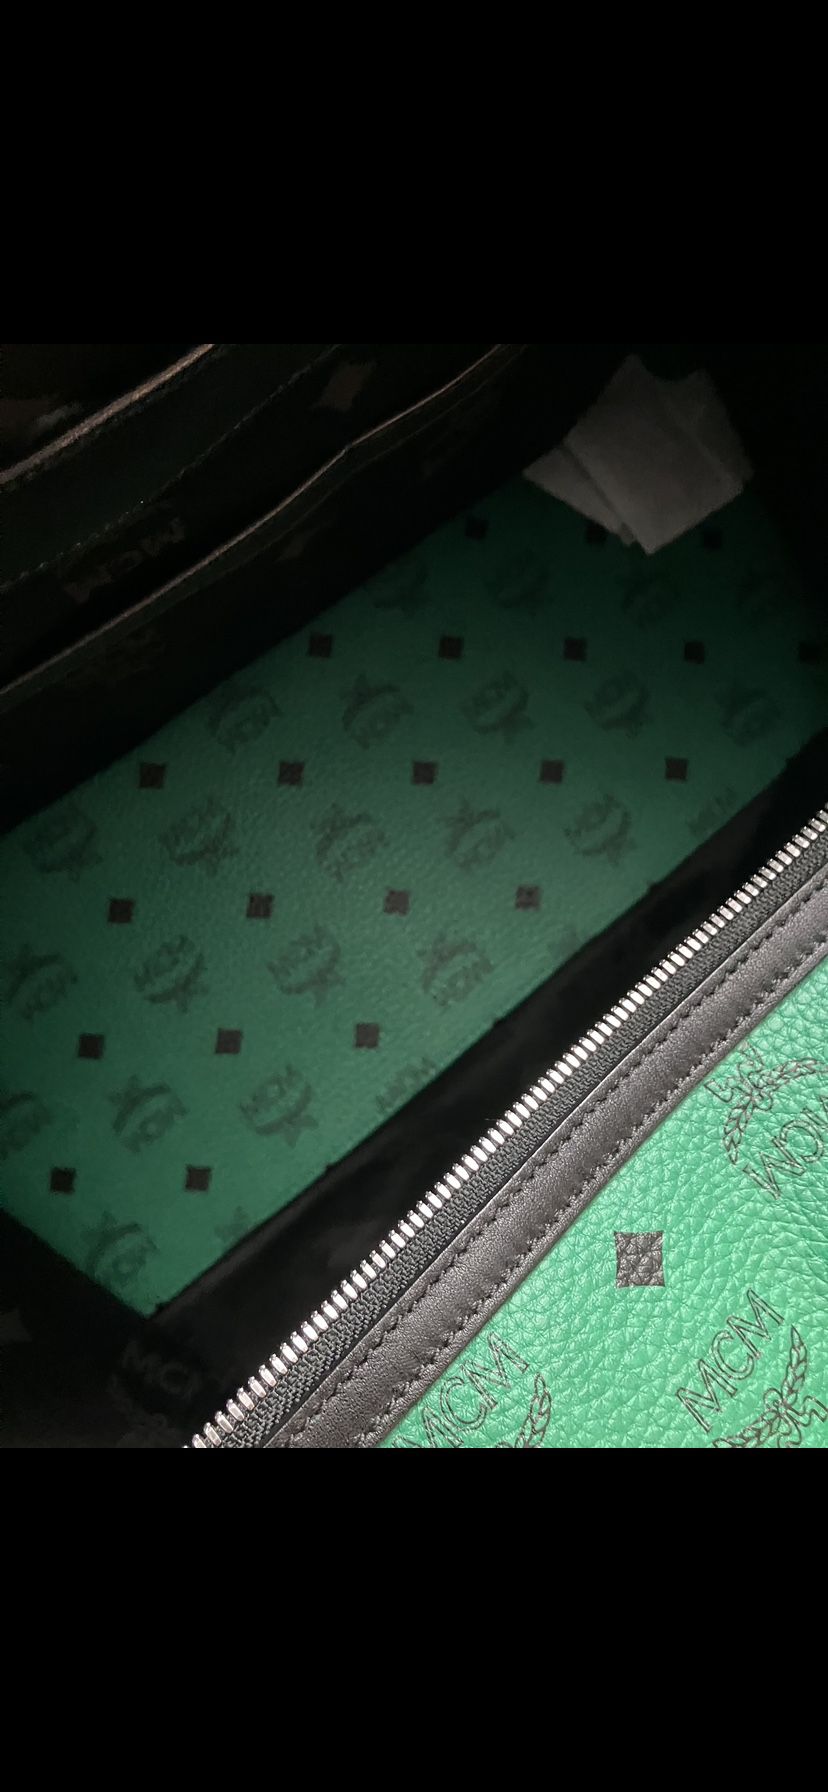 Brand NEW MCM Kelly Green Travel Bag for Sale in Linden, NJ